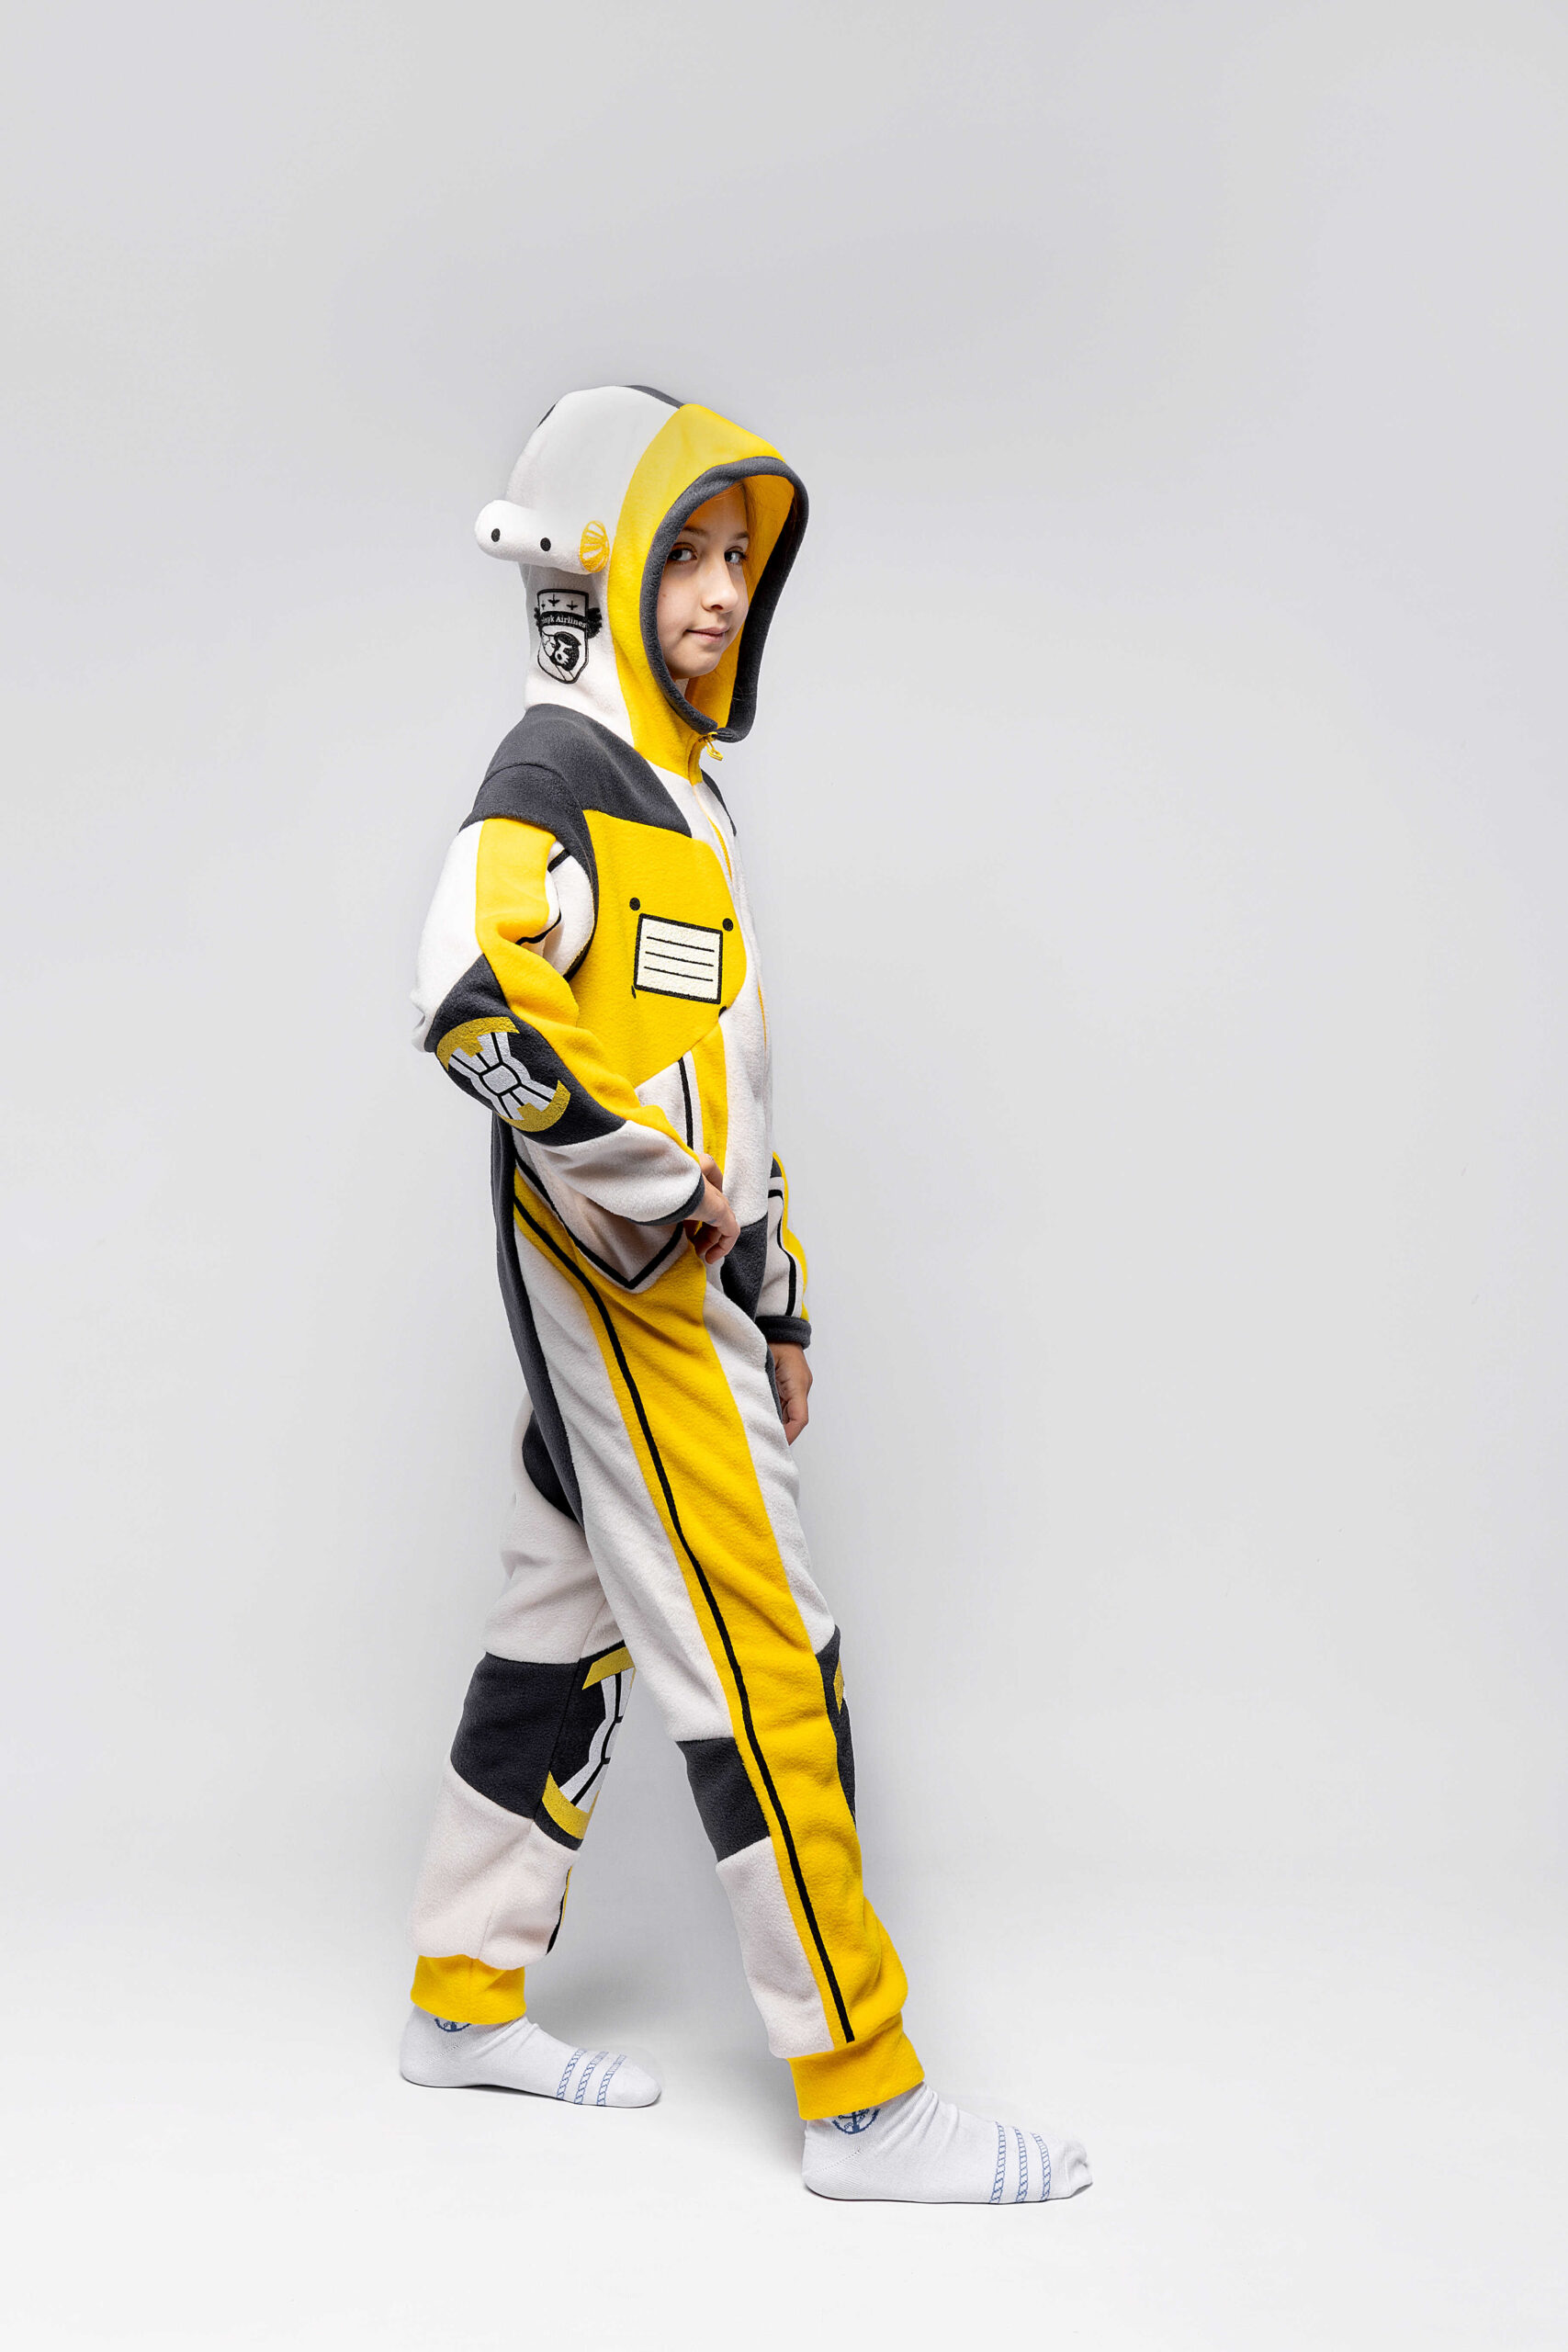 Pajamas Spacesuit. Color yellow. 
Technique of prints applied: silkscreen printing.